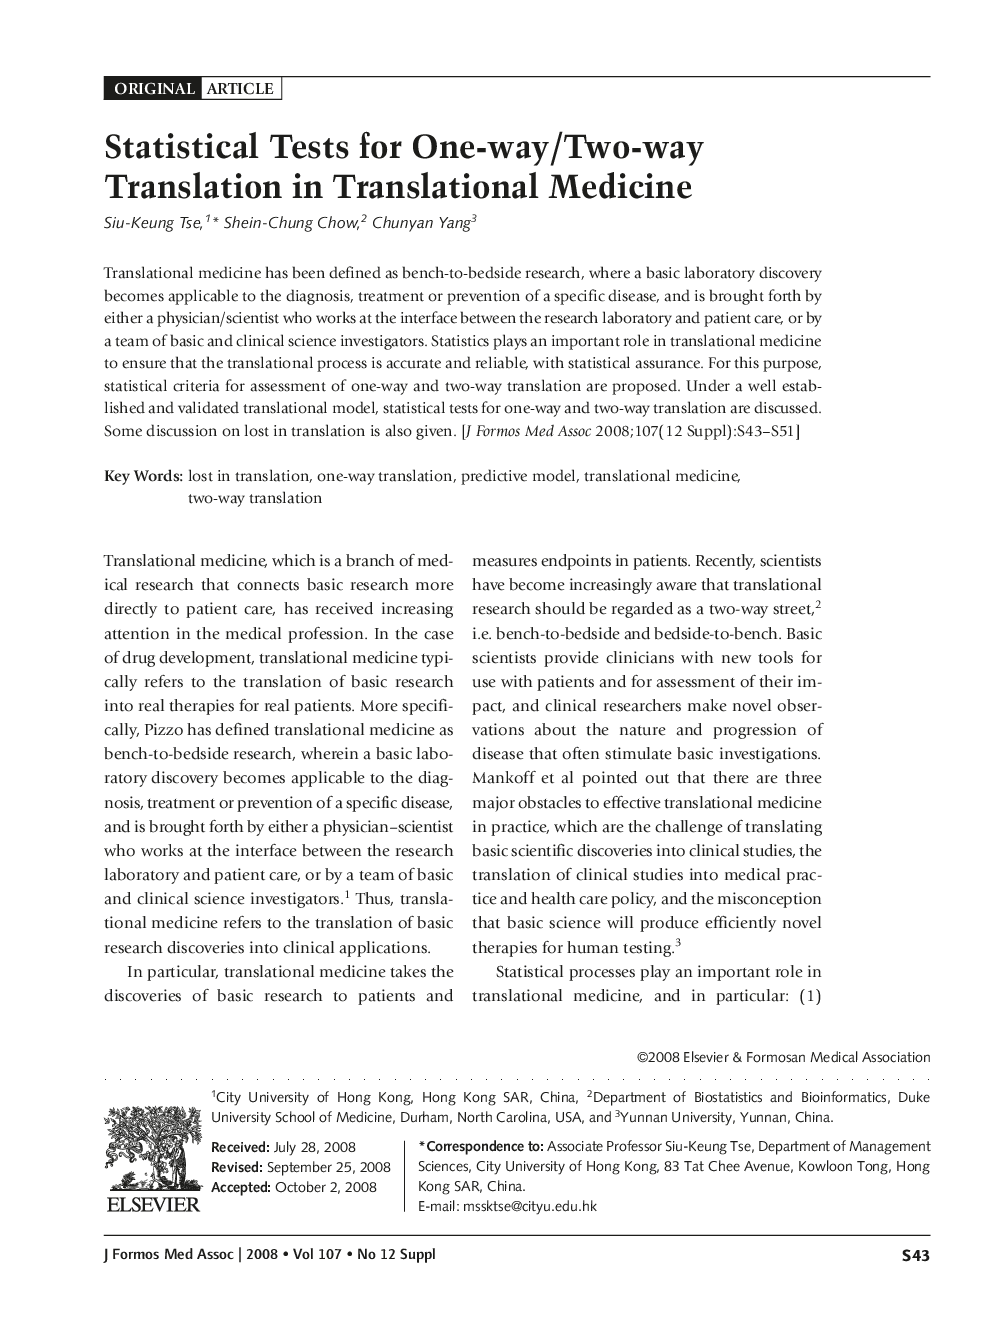 Statistical Tests for One-way/Two-way Translation in Translational Medicine